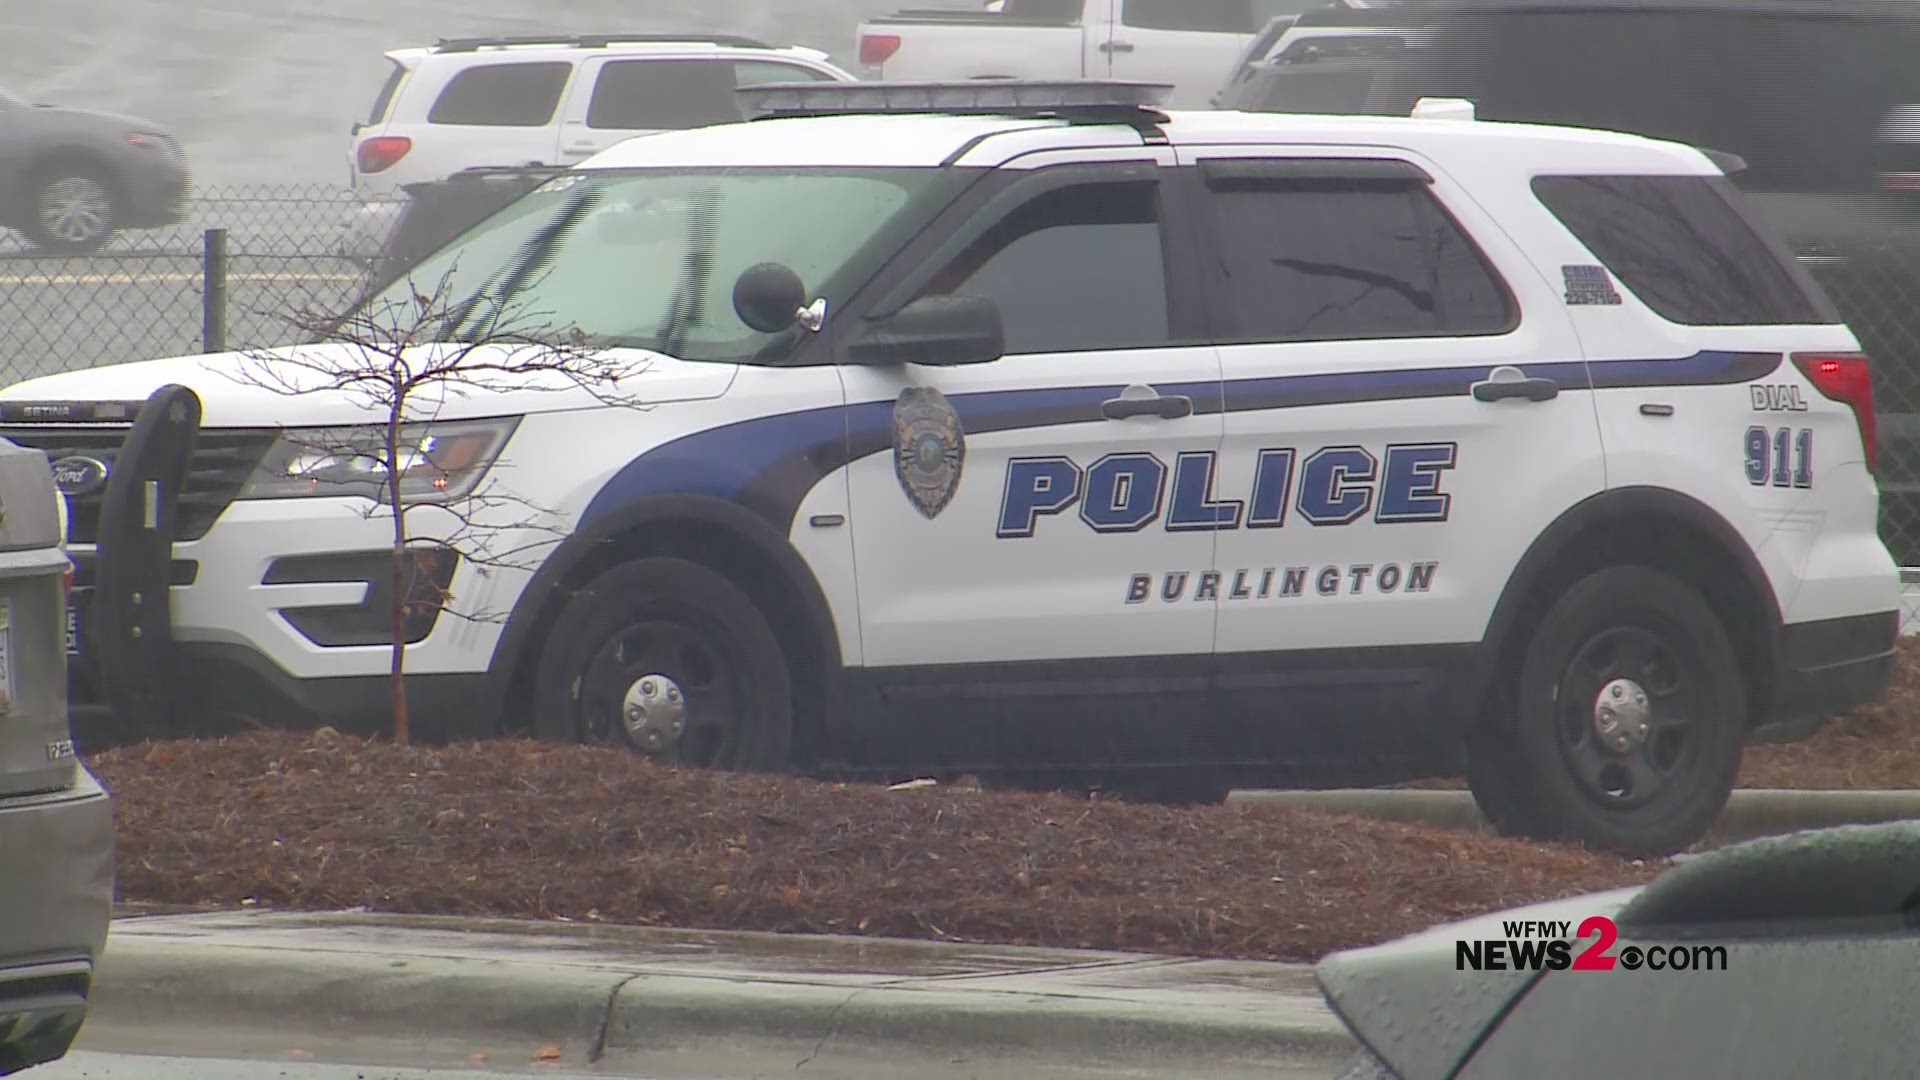 The incident happened at the Truliant Federal Credit Union located at Kirkwood Dr. in Burlington.